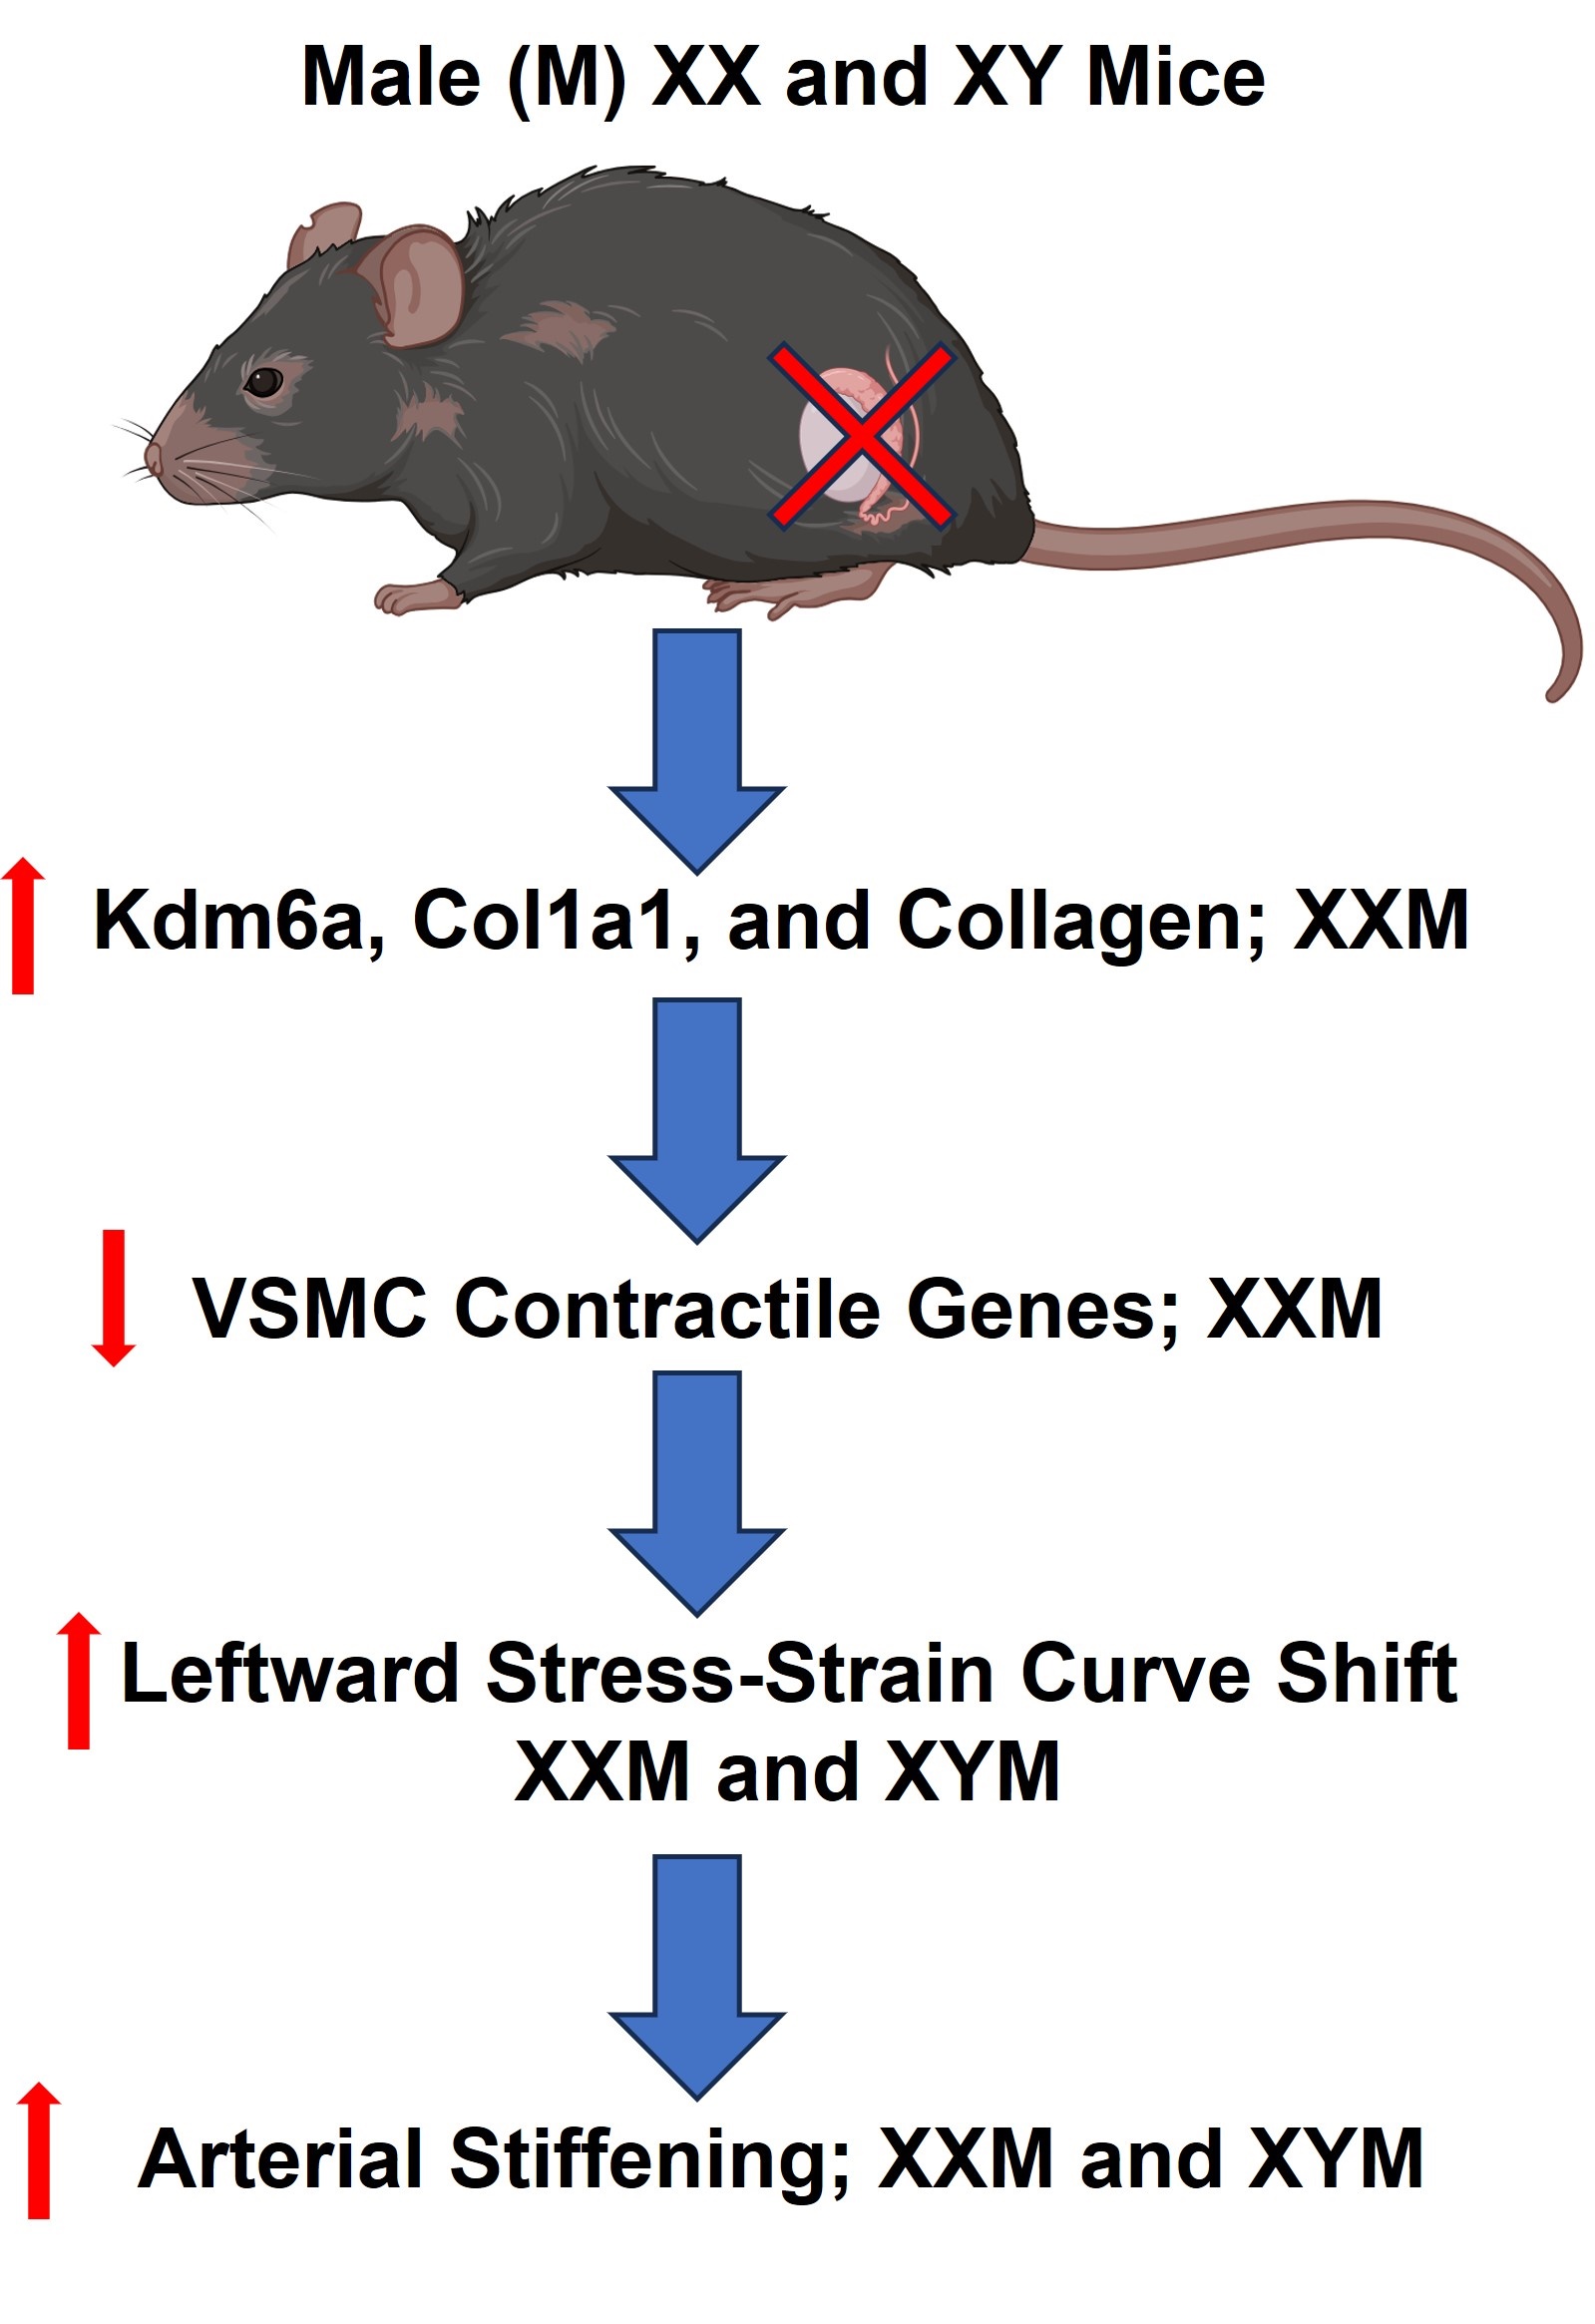 Mouse drawing and text.  Title: "Male (M) XX and XY Mice", visual image of mouse with x on body,arrow points down to "arrow points up Kdm6a, Col1a1, and Collagen; XXM" arrow points down to "downward arrow VSMC Contractile Genes; XXM" arrow down to "Upward arrow; leftward stress-strain curve shift XXM and XYM" arrow pointing down to "arrow up; arterial stiffening; XXM and XYM"